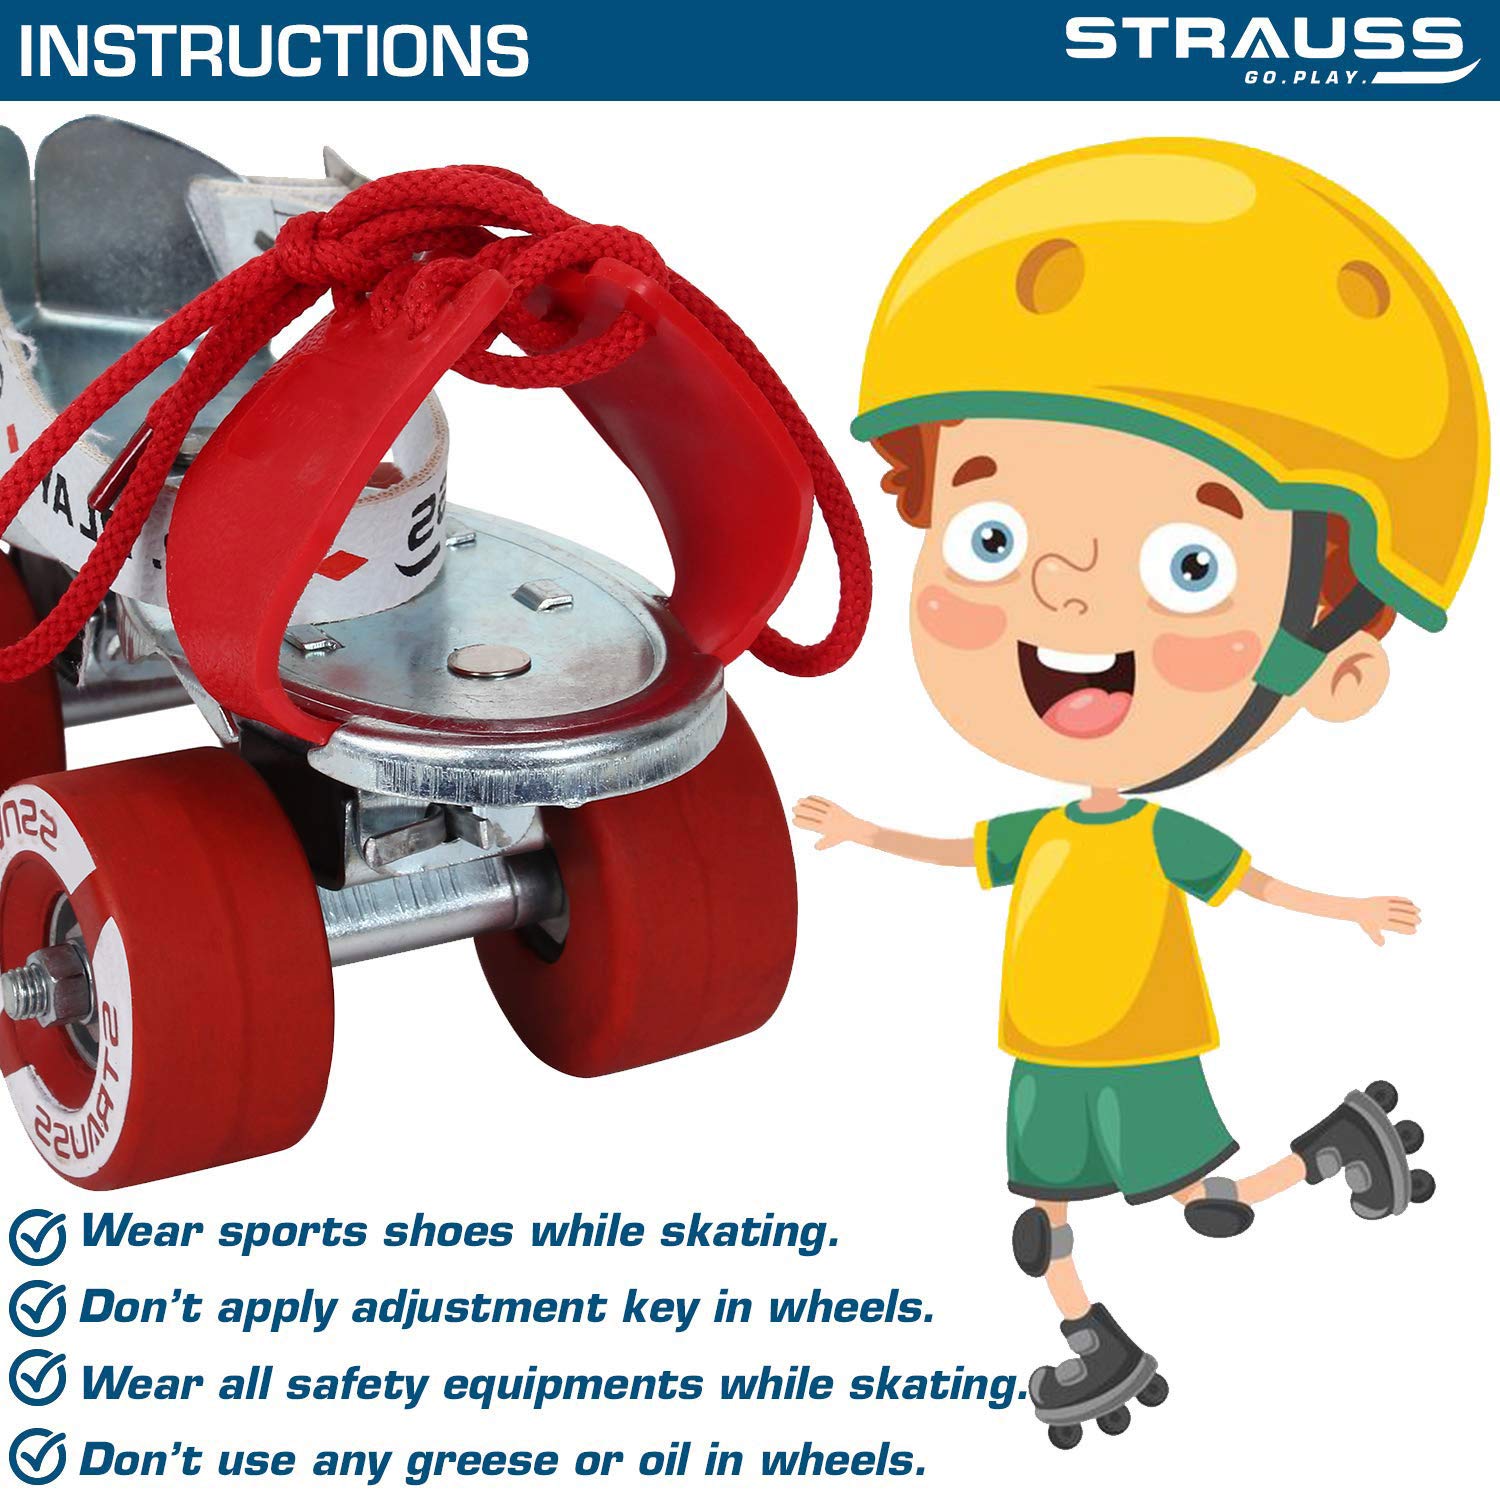 STRAUSS Tenacity Roller Skates | Roller Blades for Kids | Adjustable Shoe Size | 4 Wheels Skating Shoe for Boys and Girls | Ideal for Indoor and Outdoor Skating | Age Group 6-8 Years, (Silver)